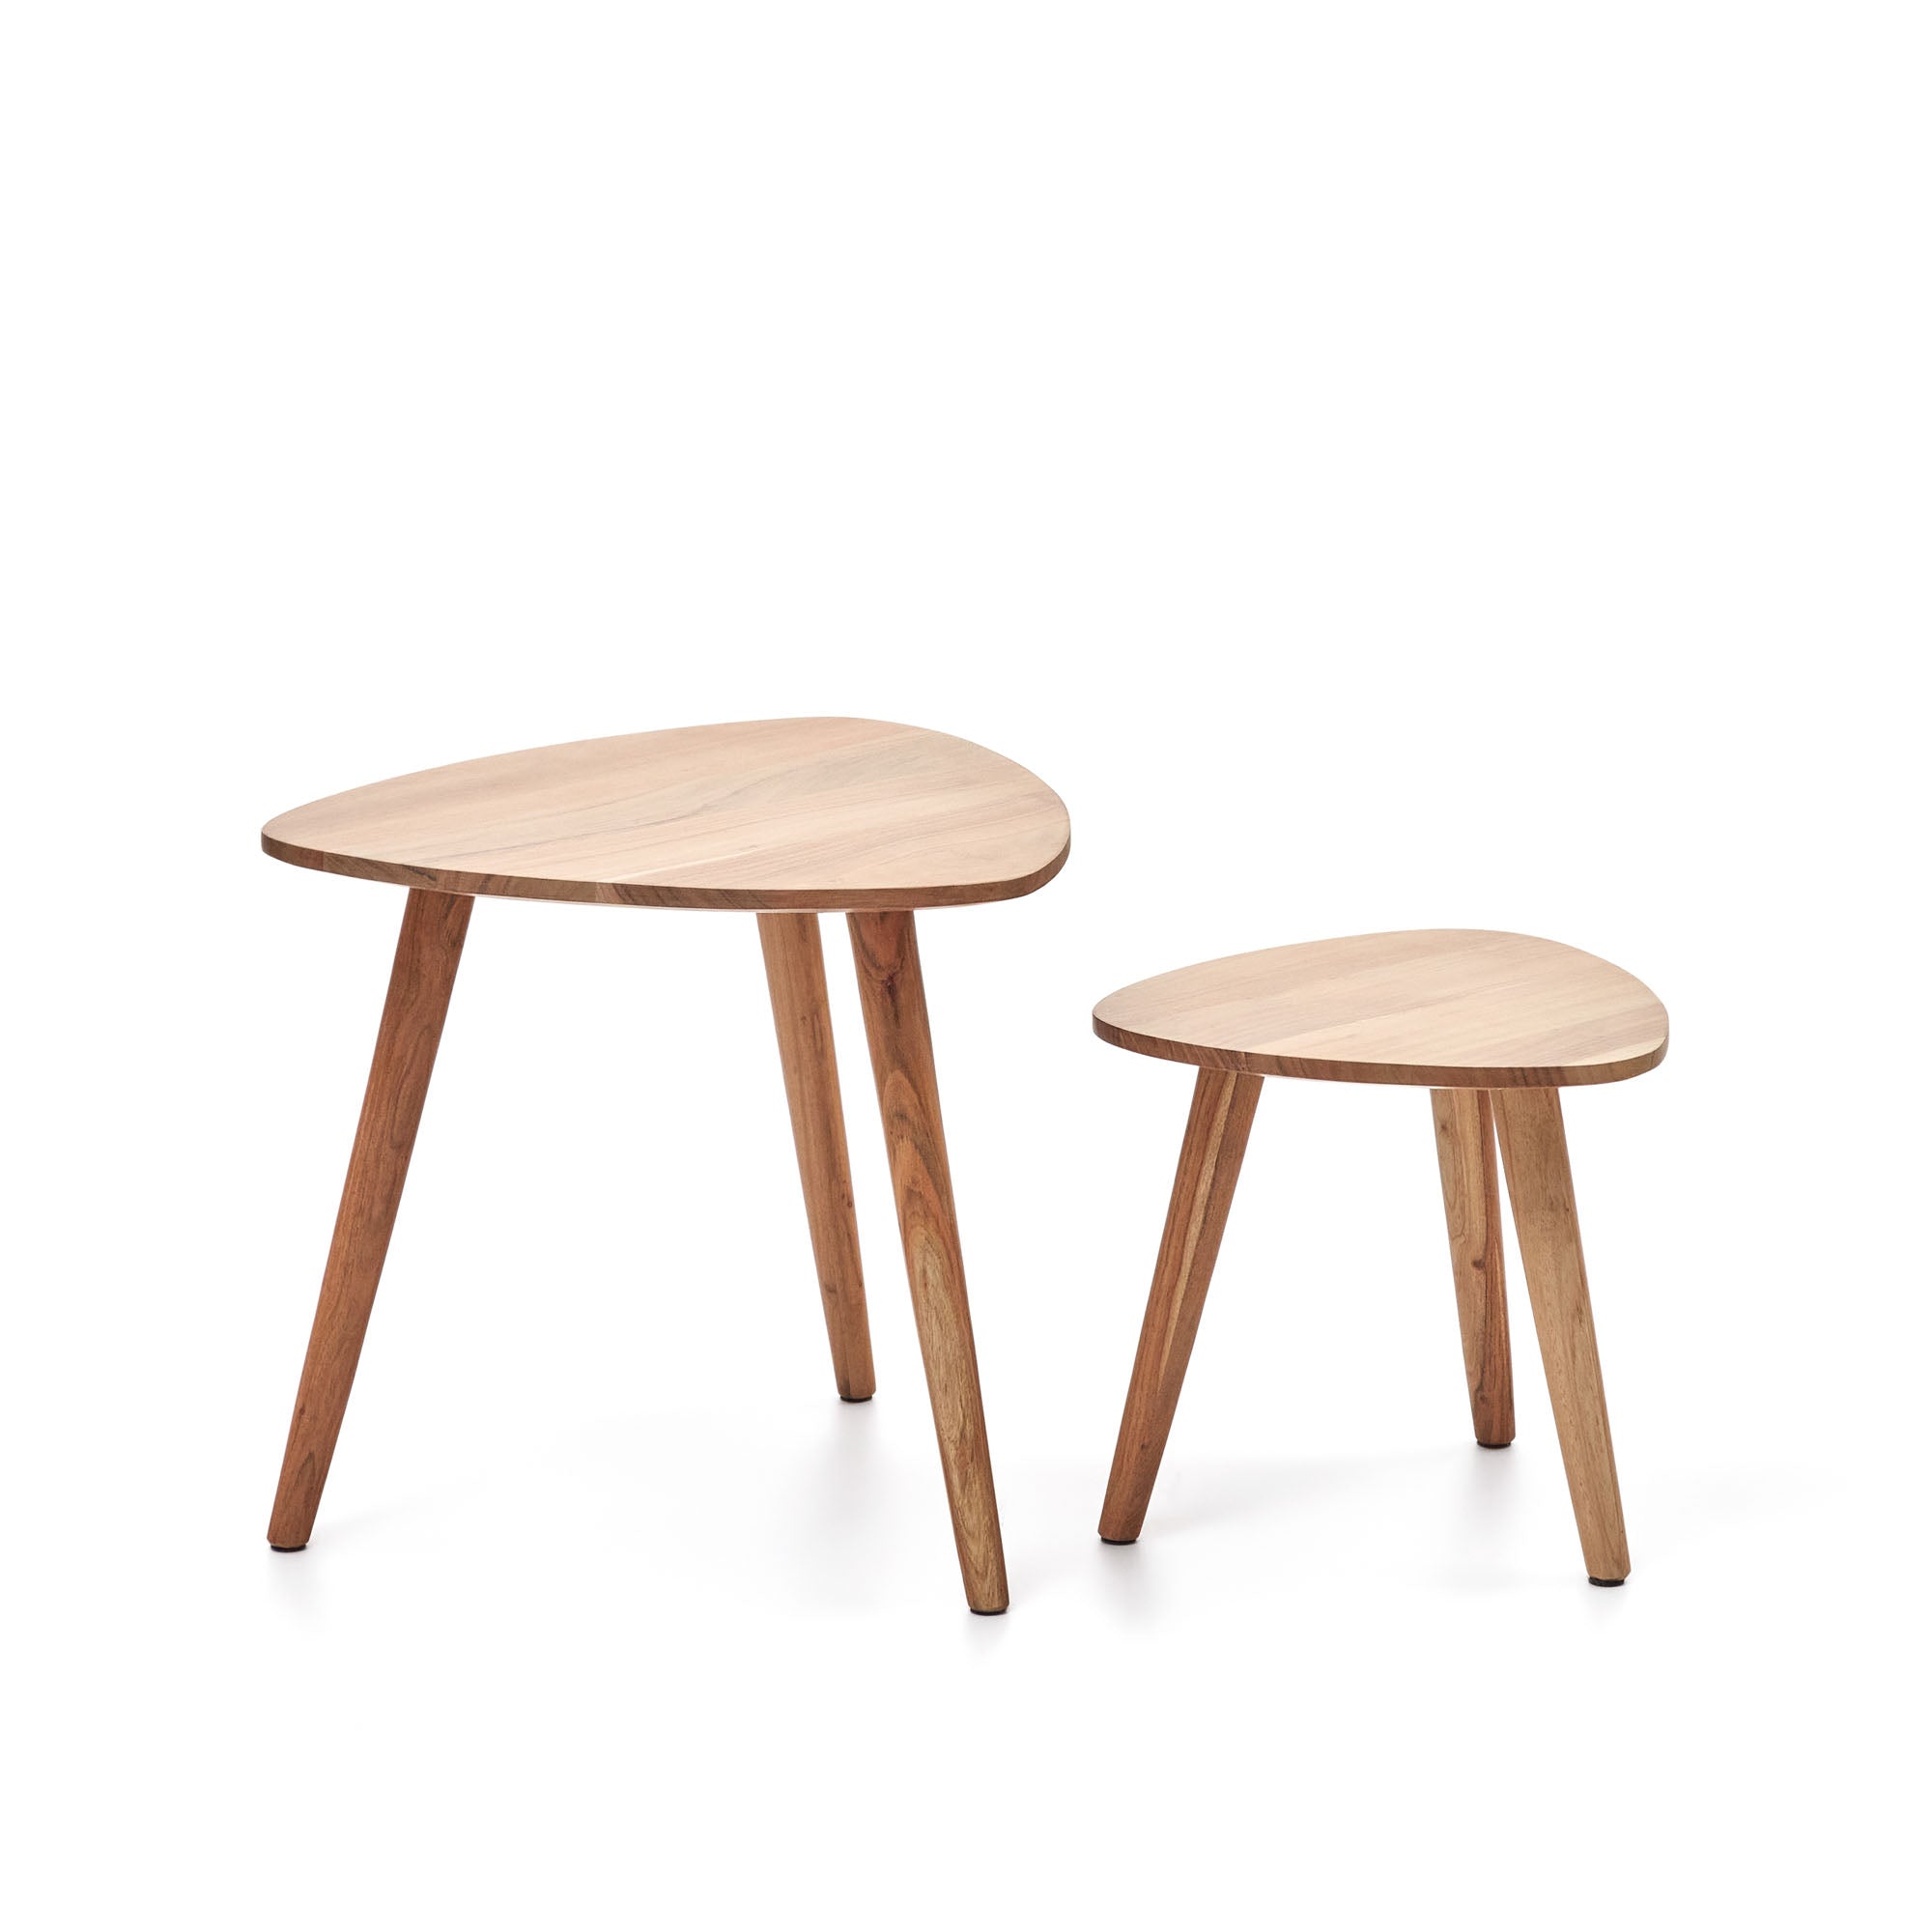 Eluana set of 2 nesting side tables in solid acacia wood with natural finish